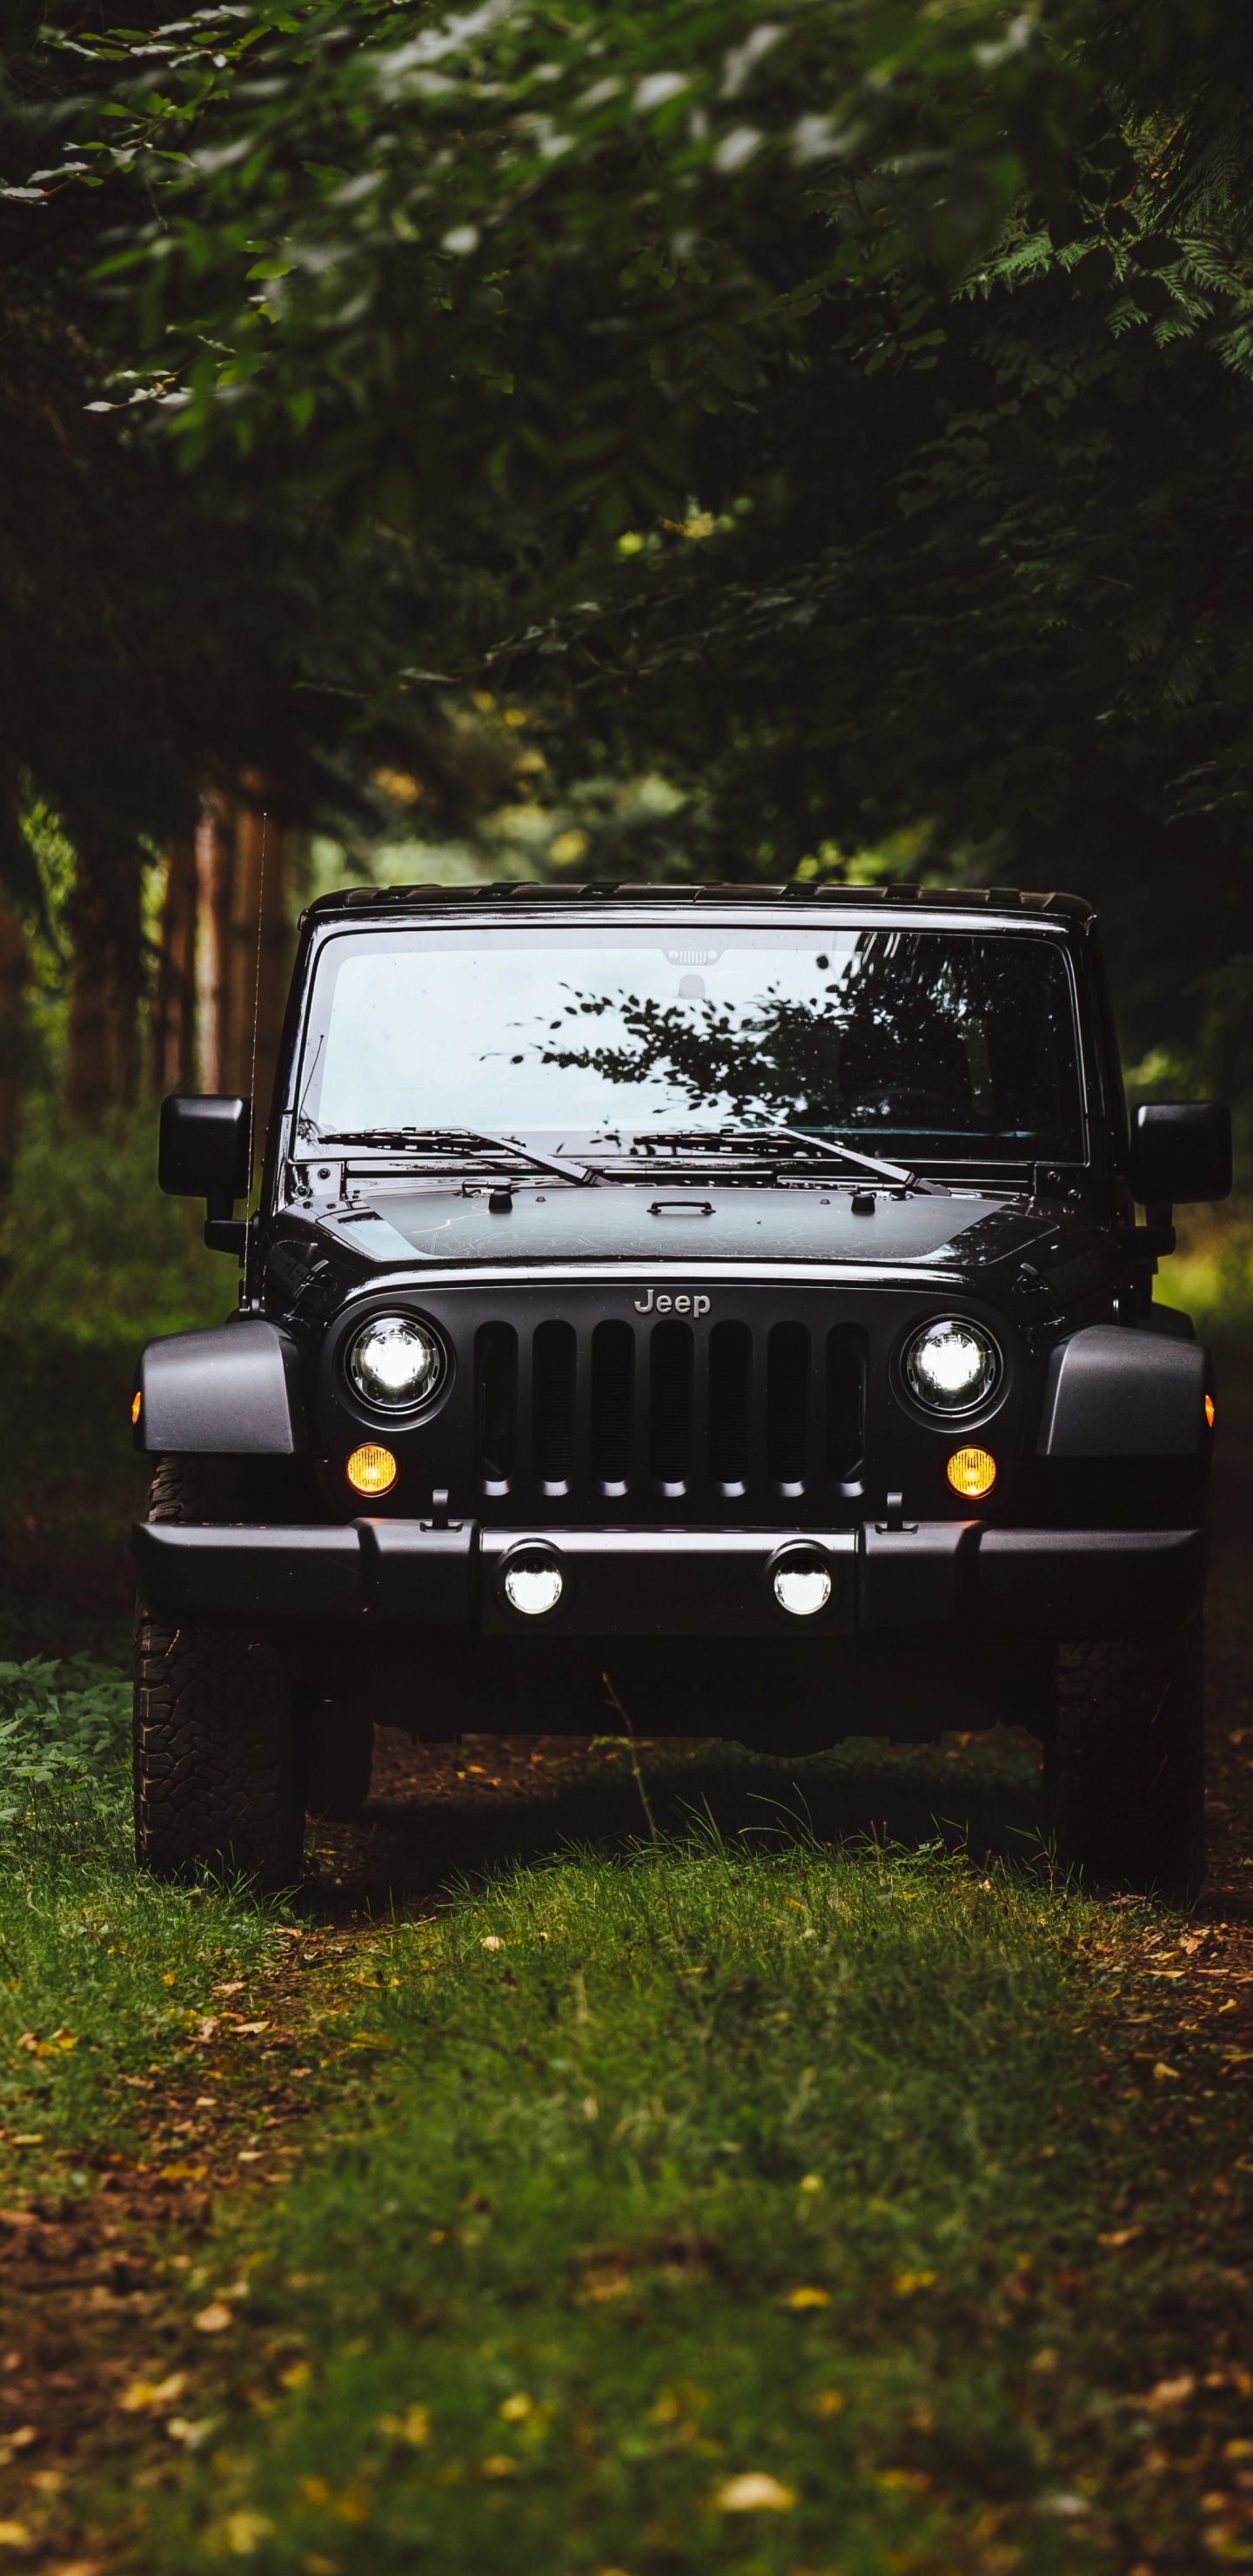 Black Jeep Wrangler on Green Grass Field Surrounded by Green Trees During Daytime. Wallpaper in 1440x2960 Resolution